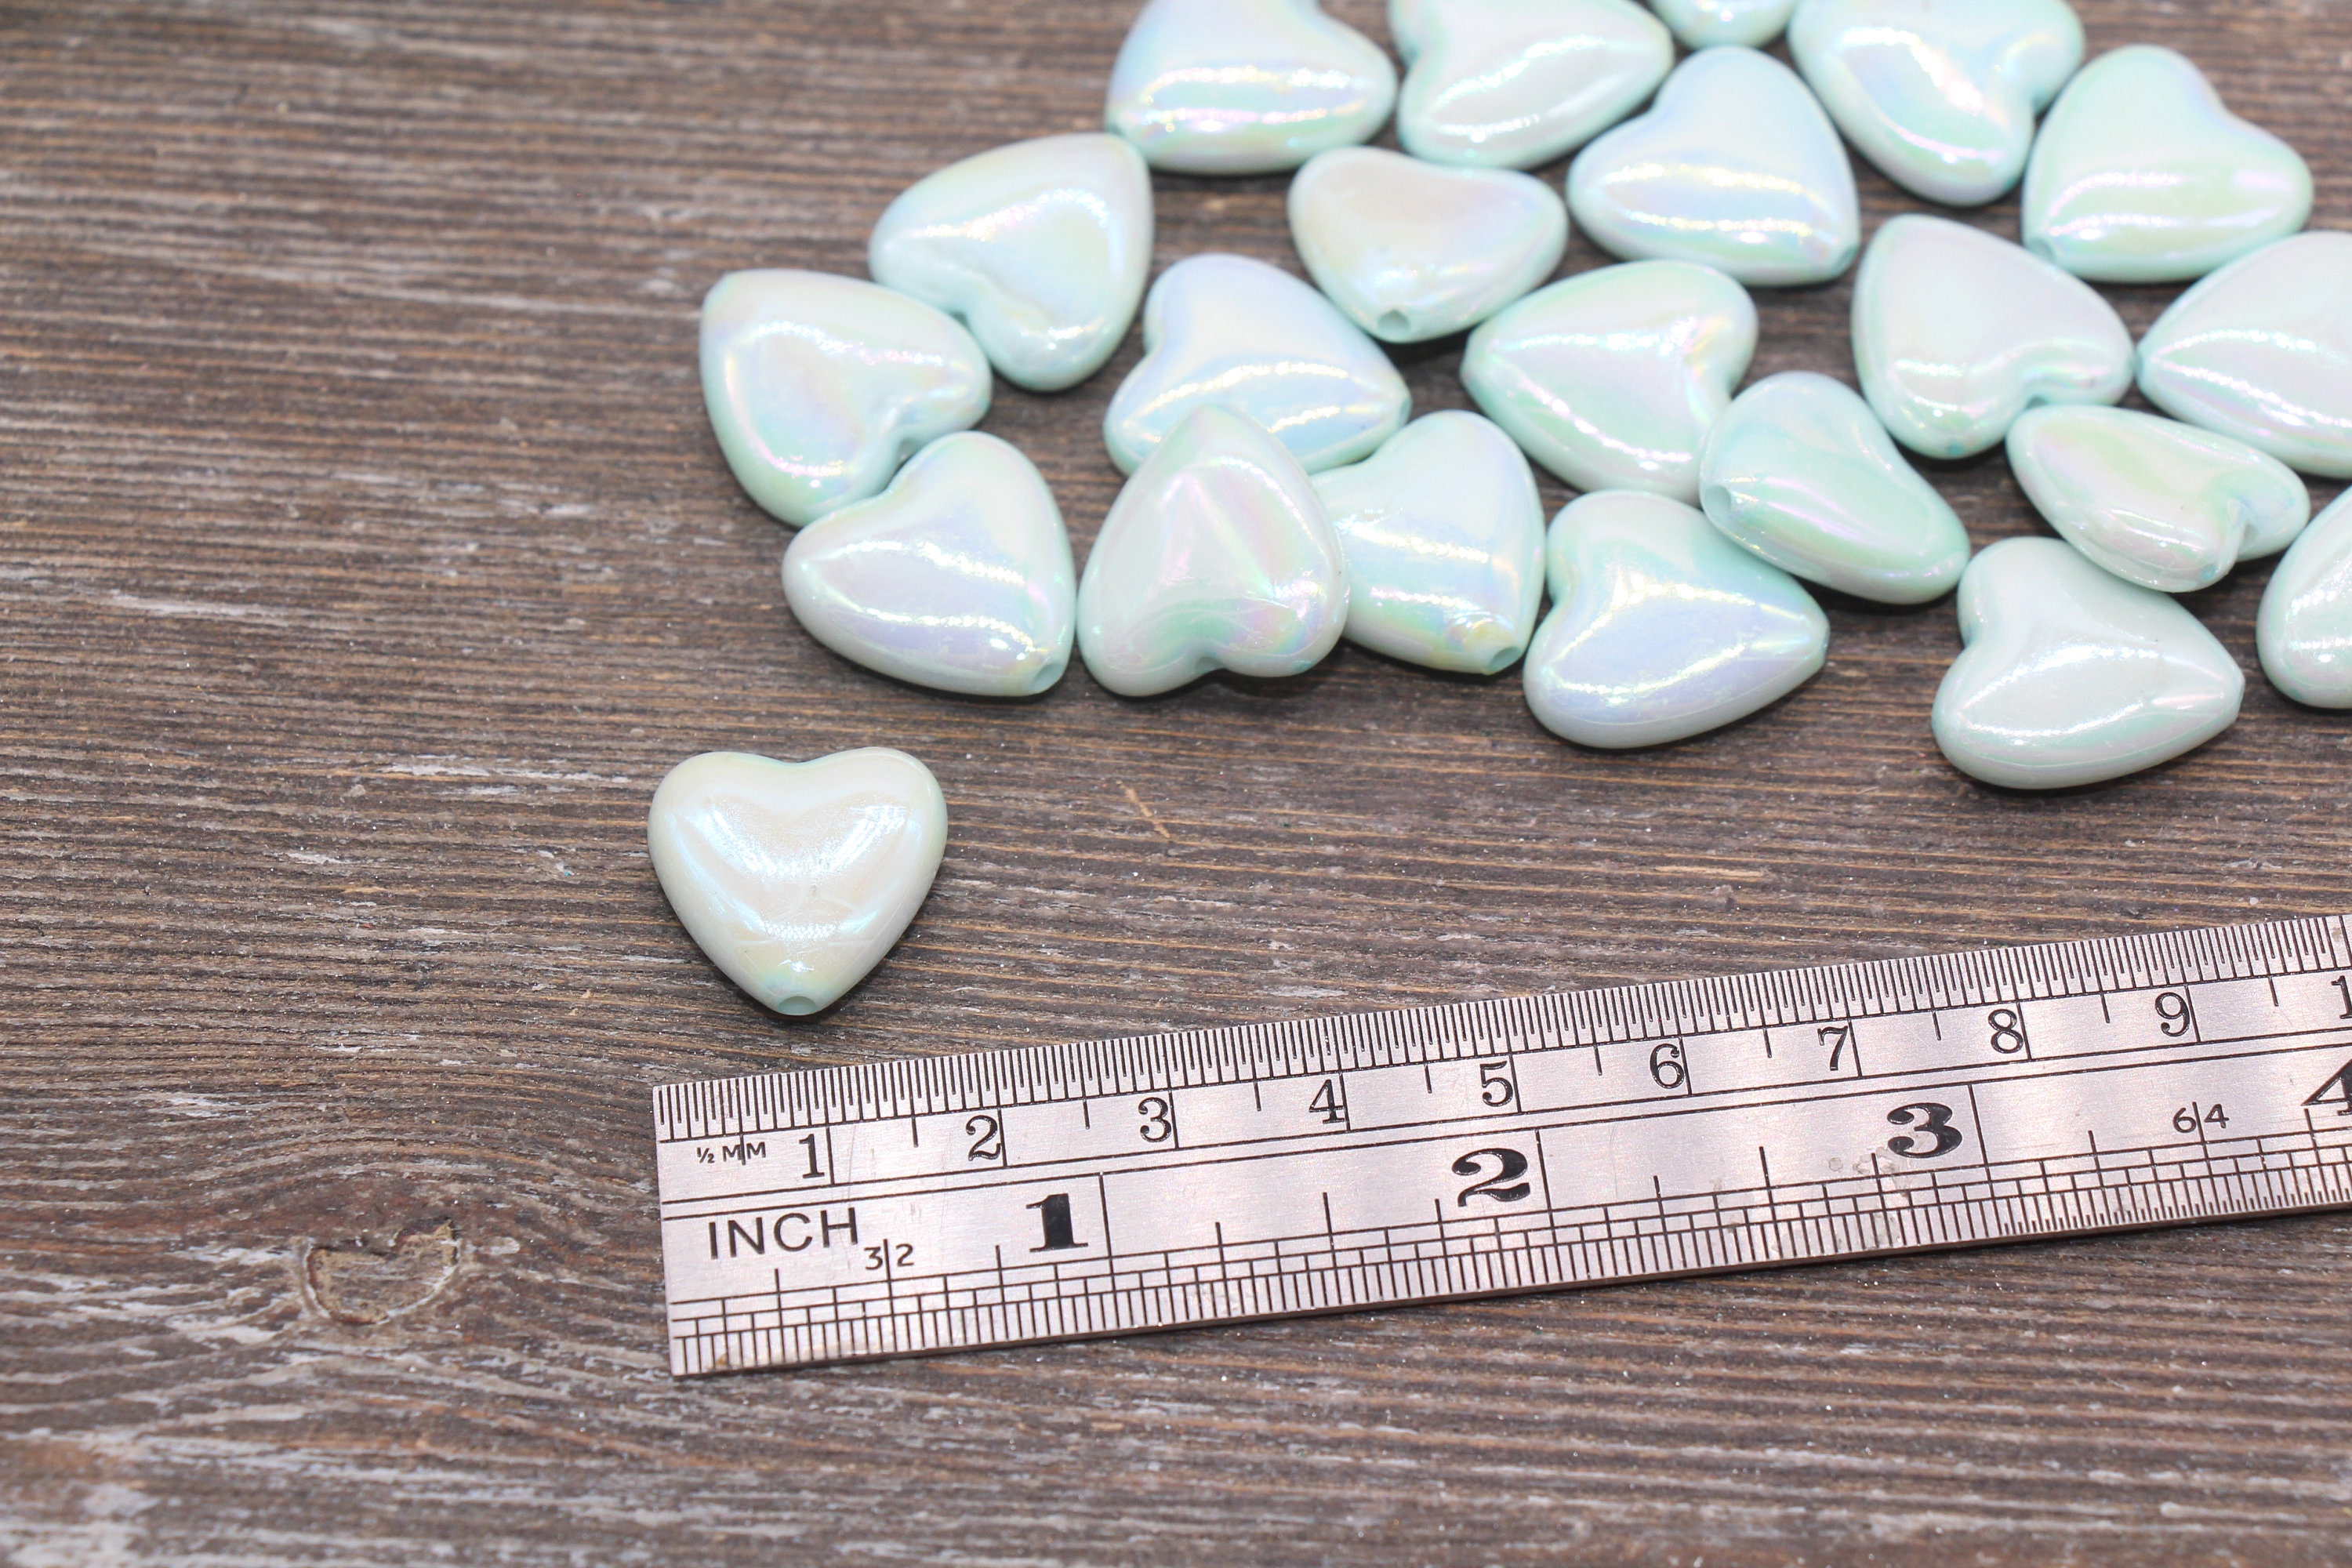 Kawaii Heart Beads | Iridescent Chunky Bead in Iridescent Color | Acrylic  Jewelry Supplies (AB Blue / 4 pcs / 17mm x 13mm)